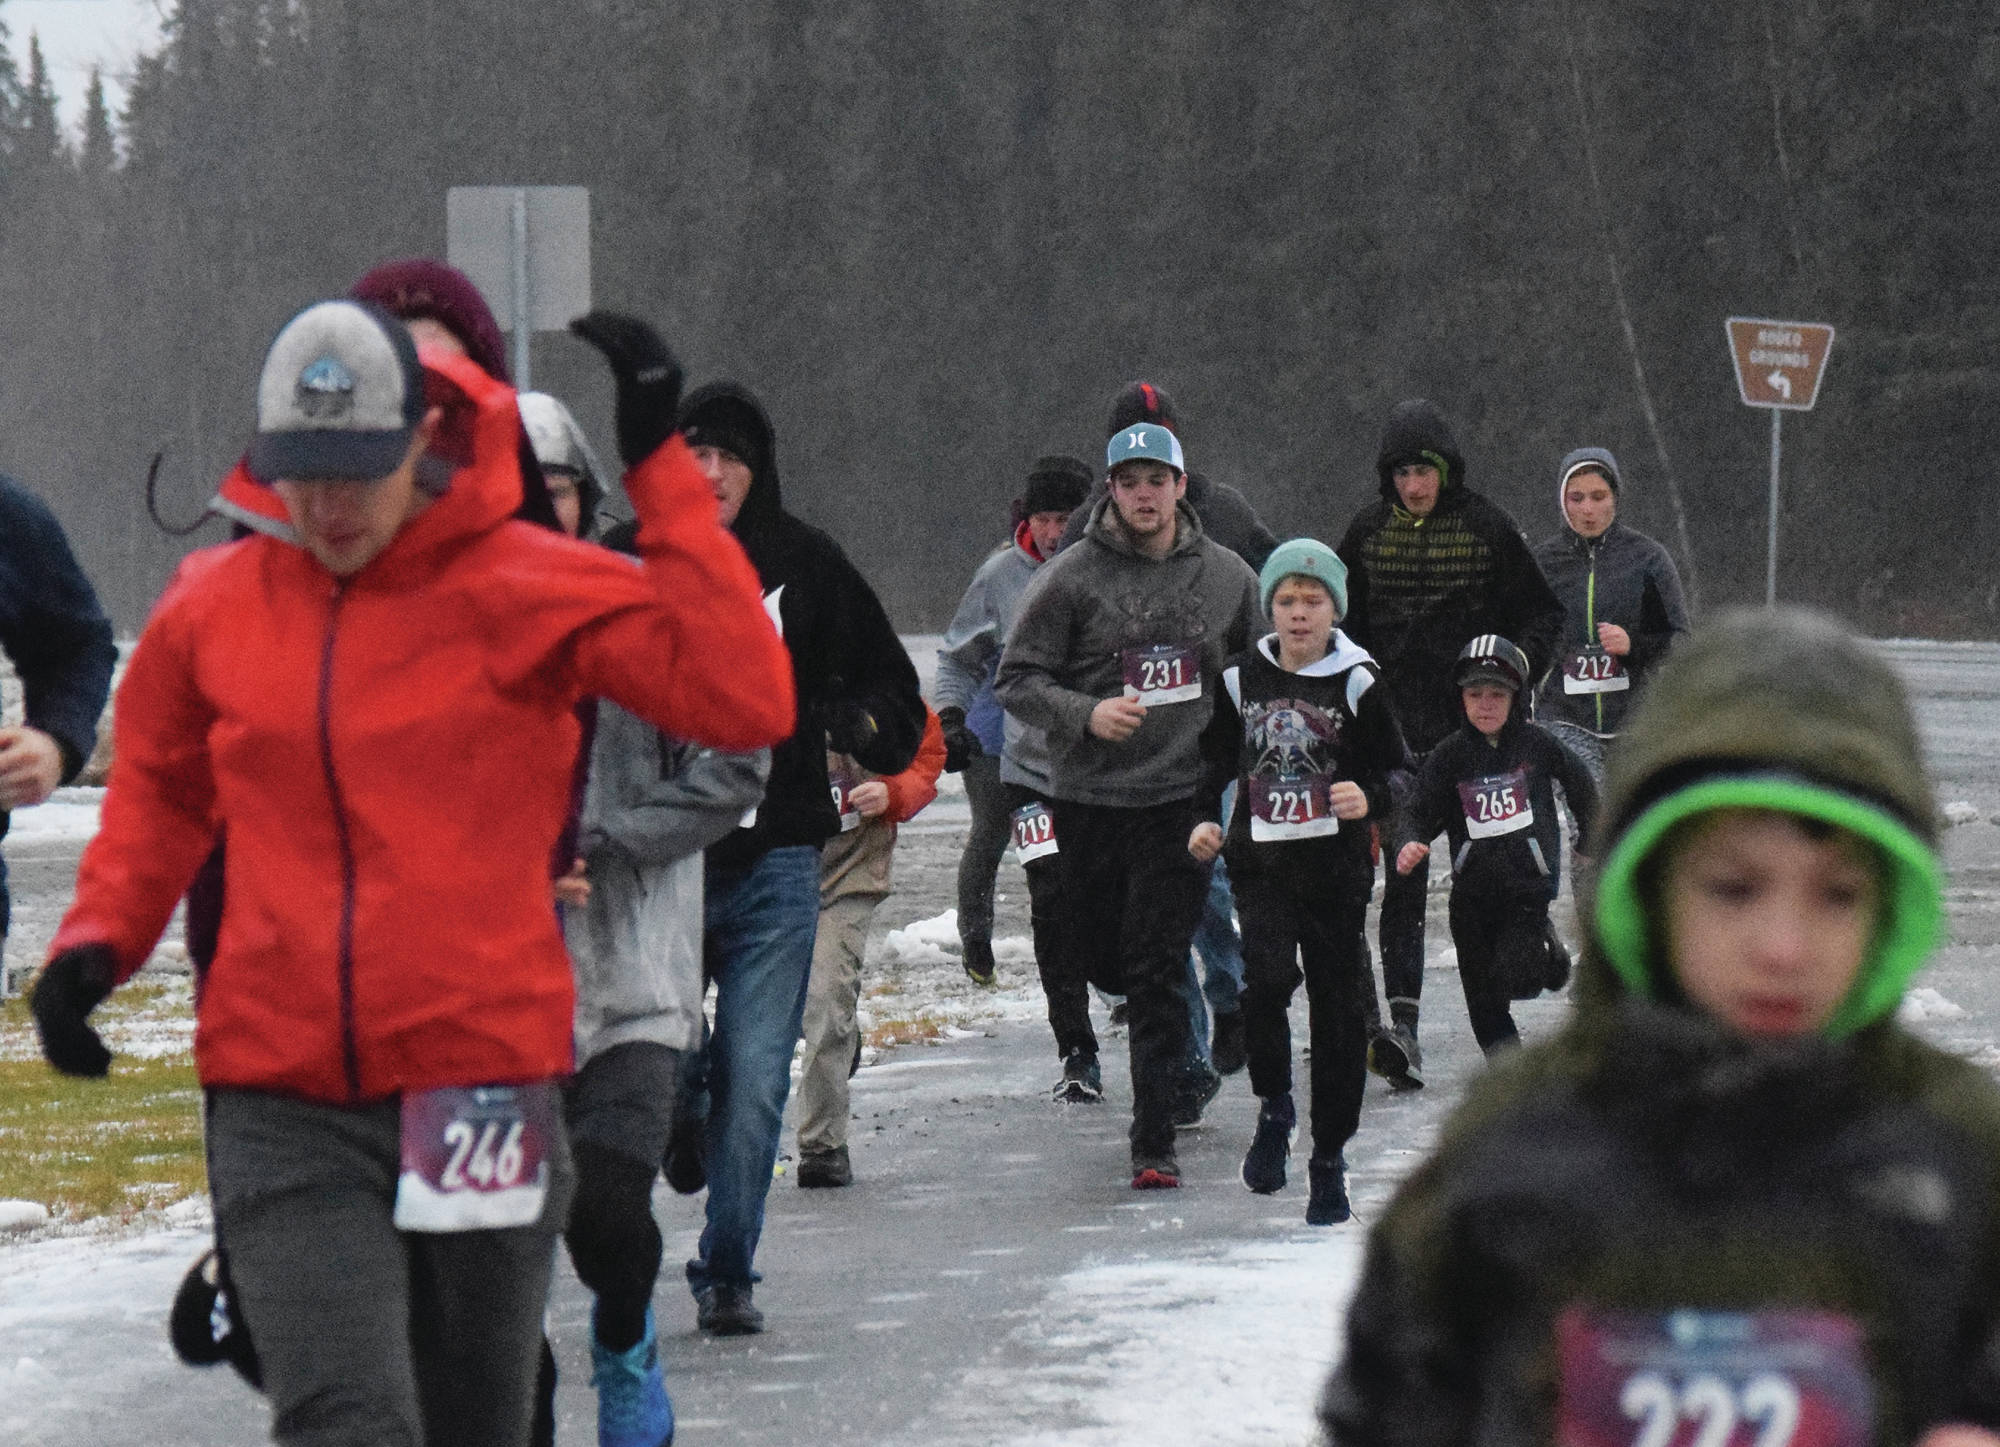 Runners stream down the Unity Trail early Thursday, Nov. 28, 2019, at the Turkey Trot in Soldotna, Alaska. (Photo by Joey Klecka/Peninsula Clarion)